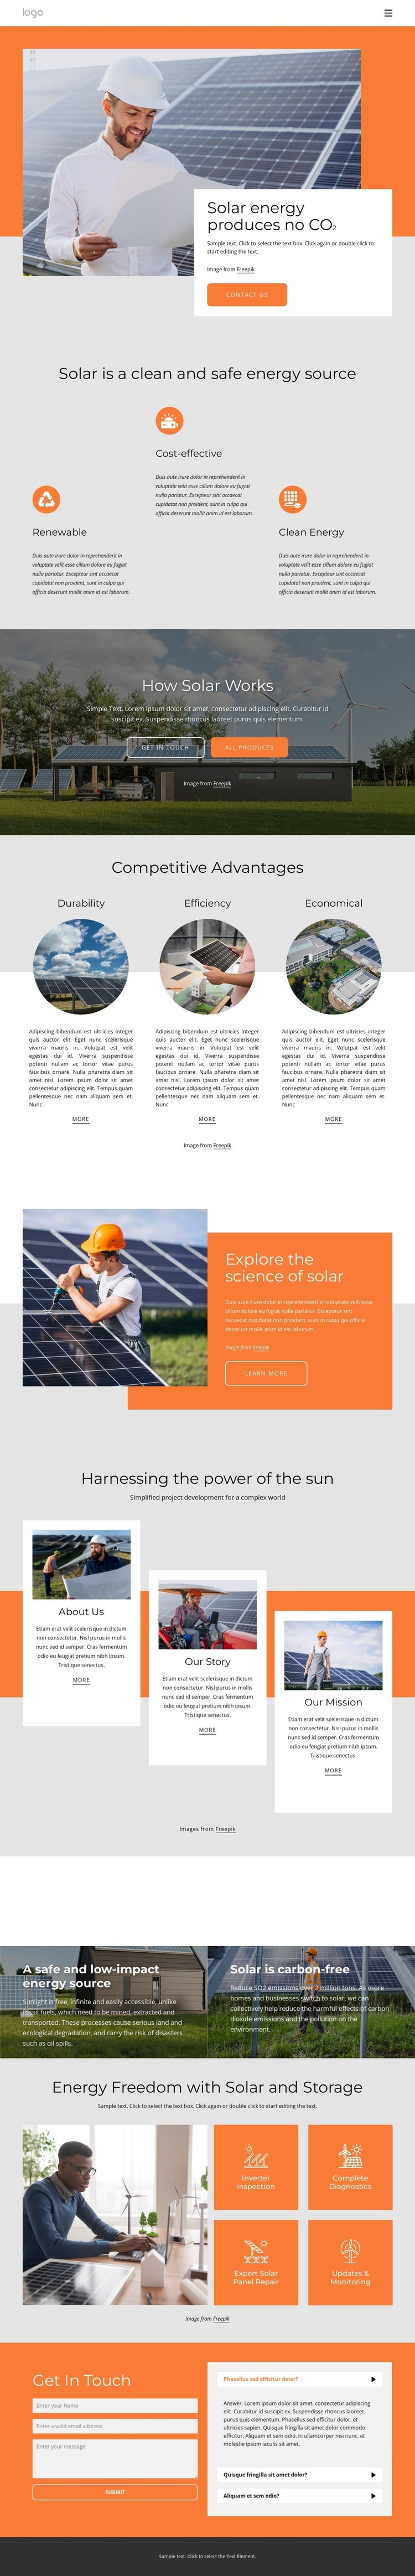 Power your home with clean solar energy Webflow Template Alternative